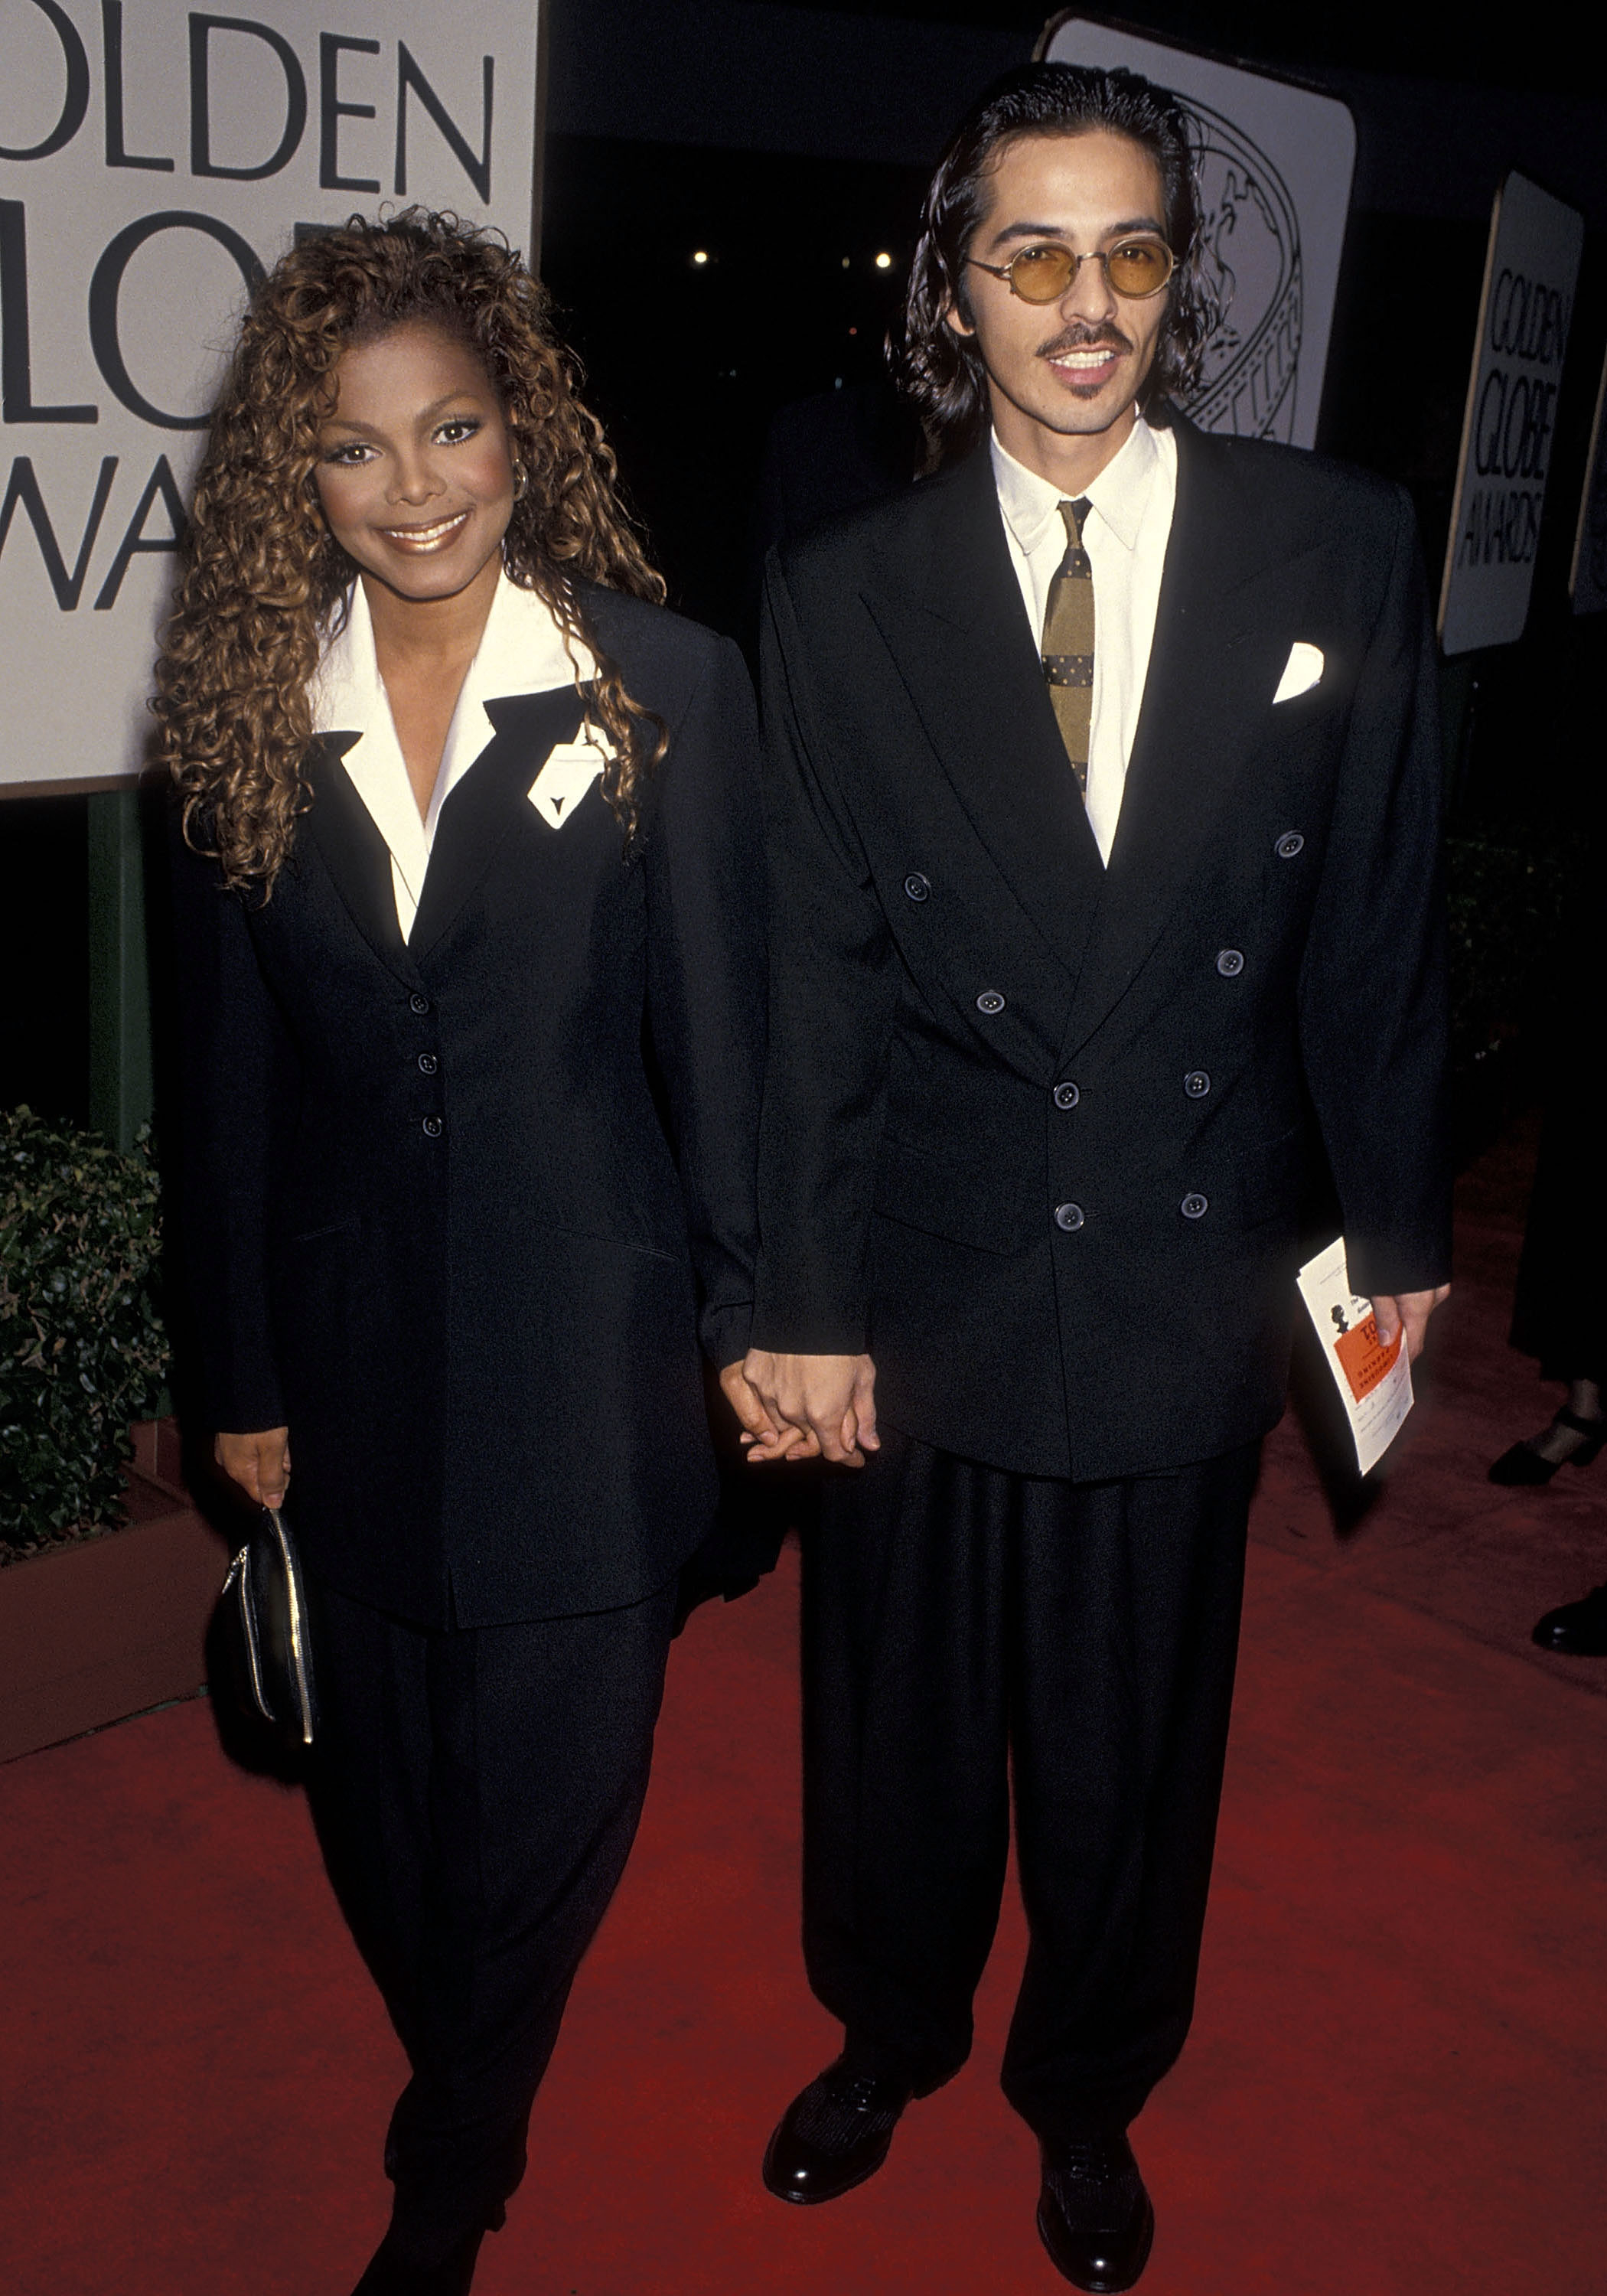 Janet Jackson and René in formal wear at the Golden Globe Awards